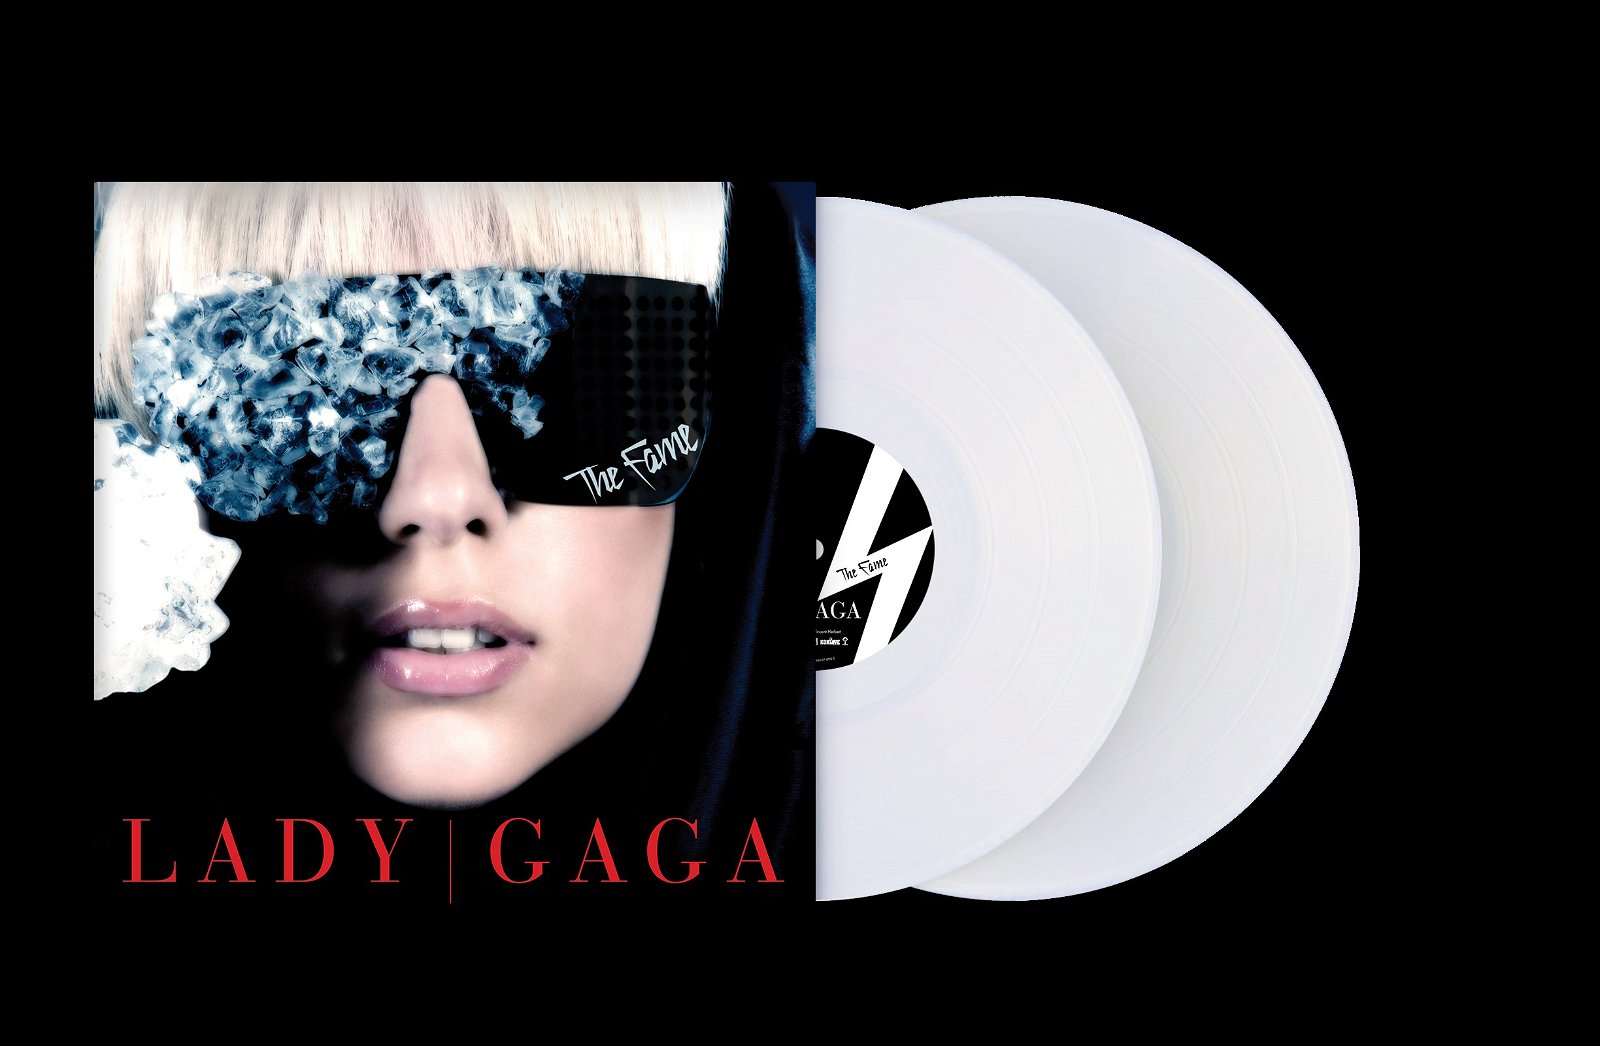 The Fame (15th Anniversary) Opague White edition